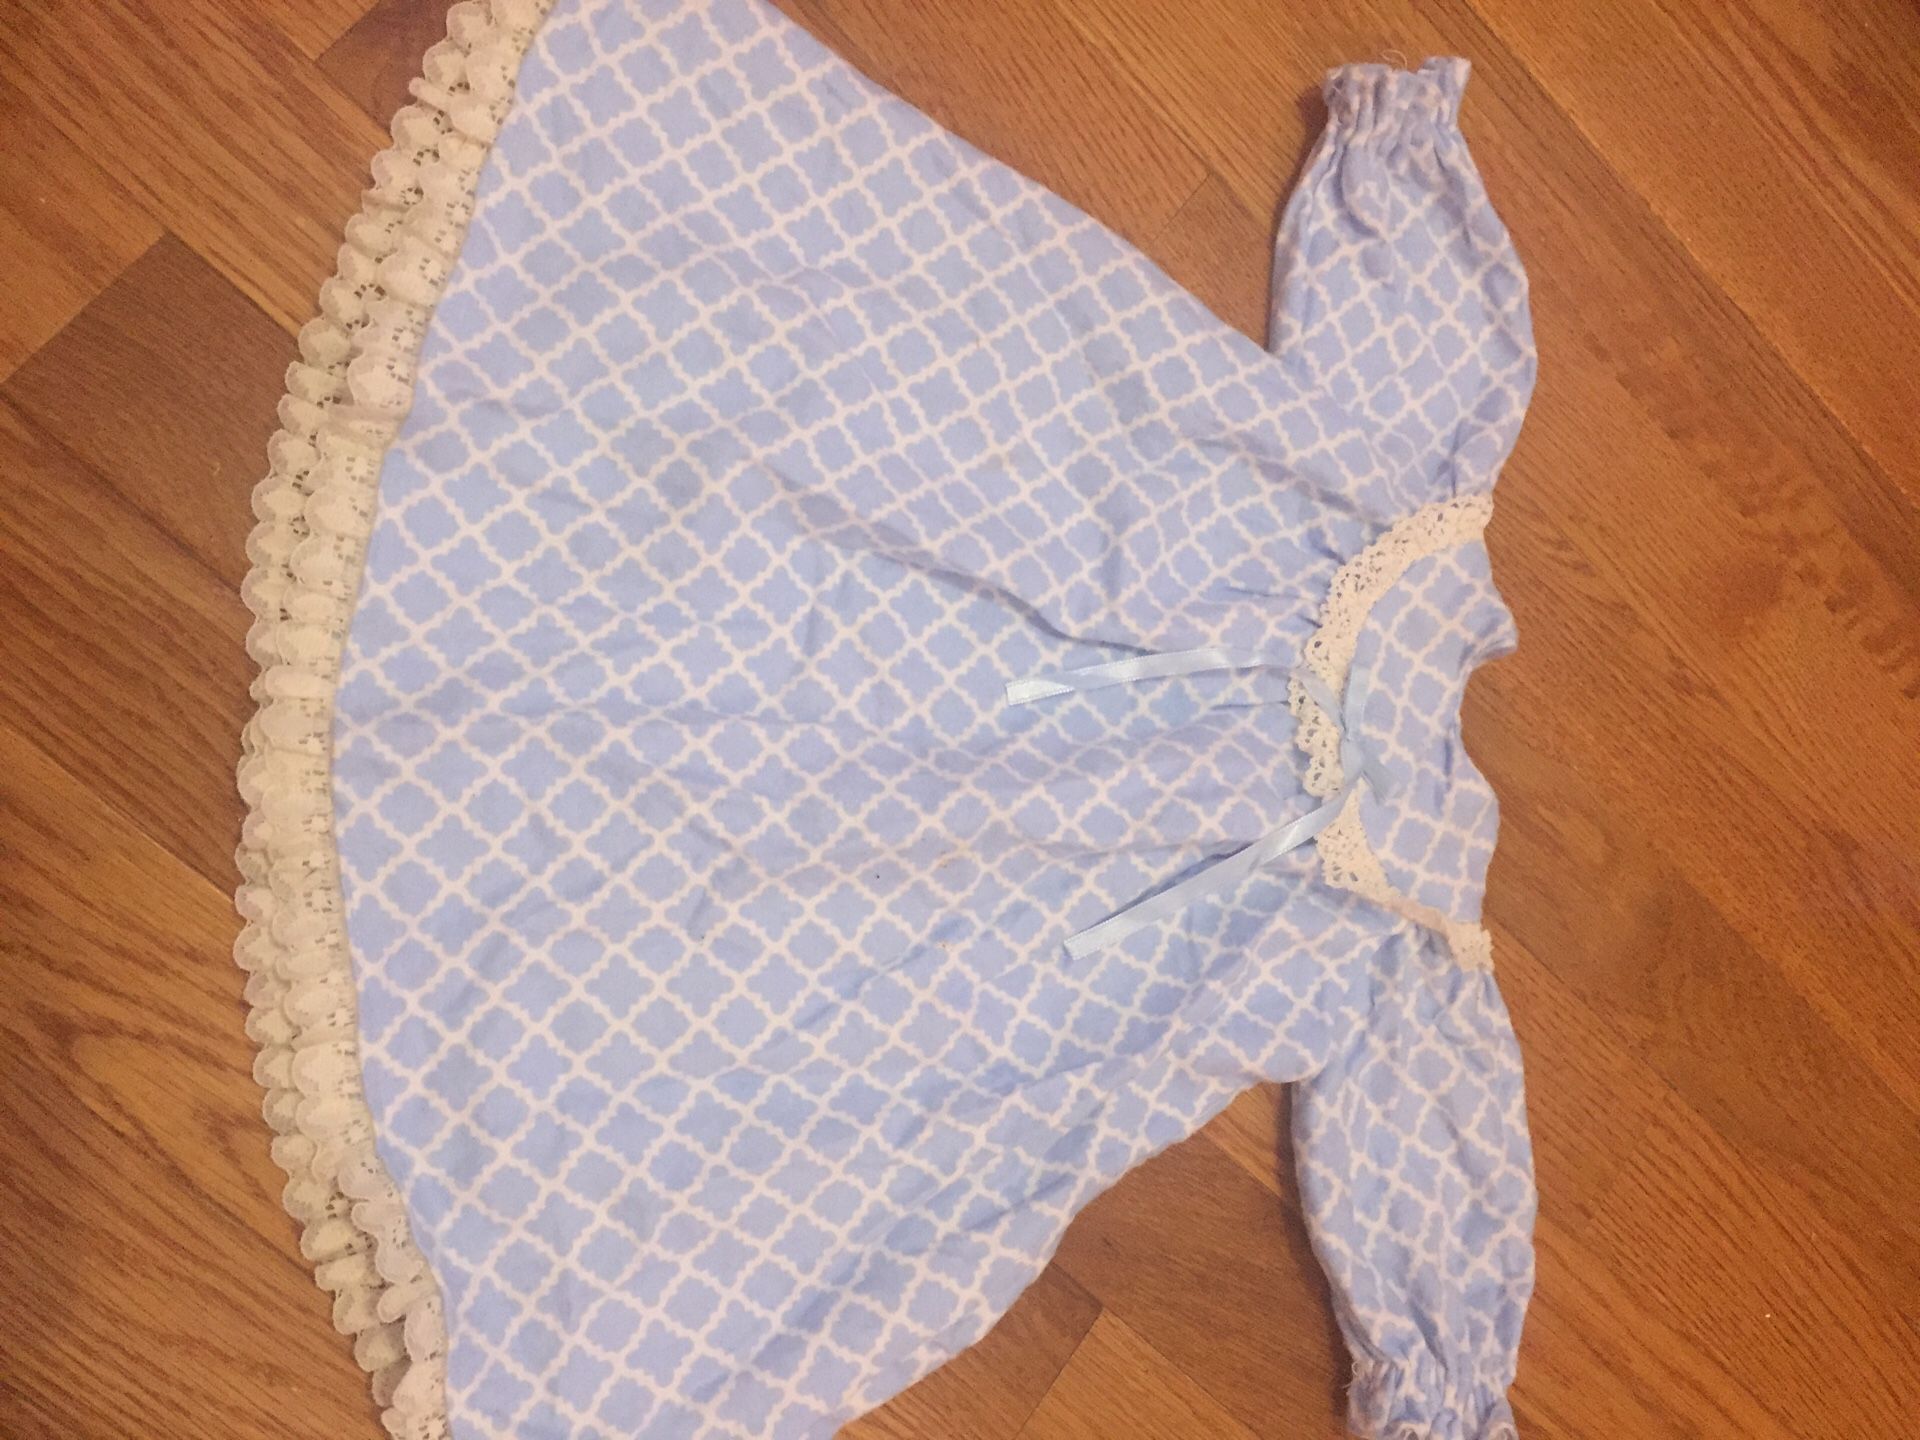 Blue American girl doll clothes